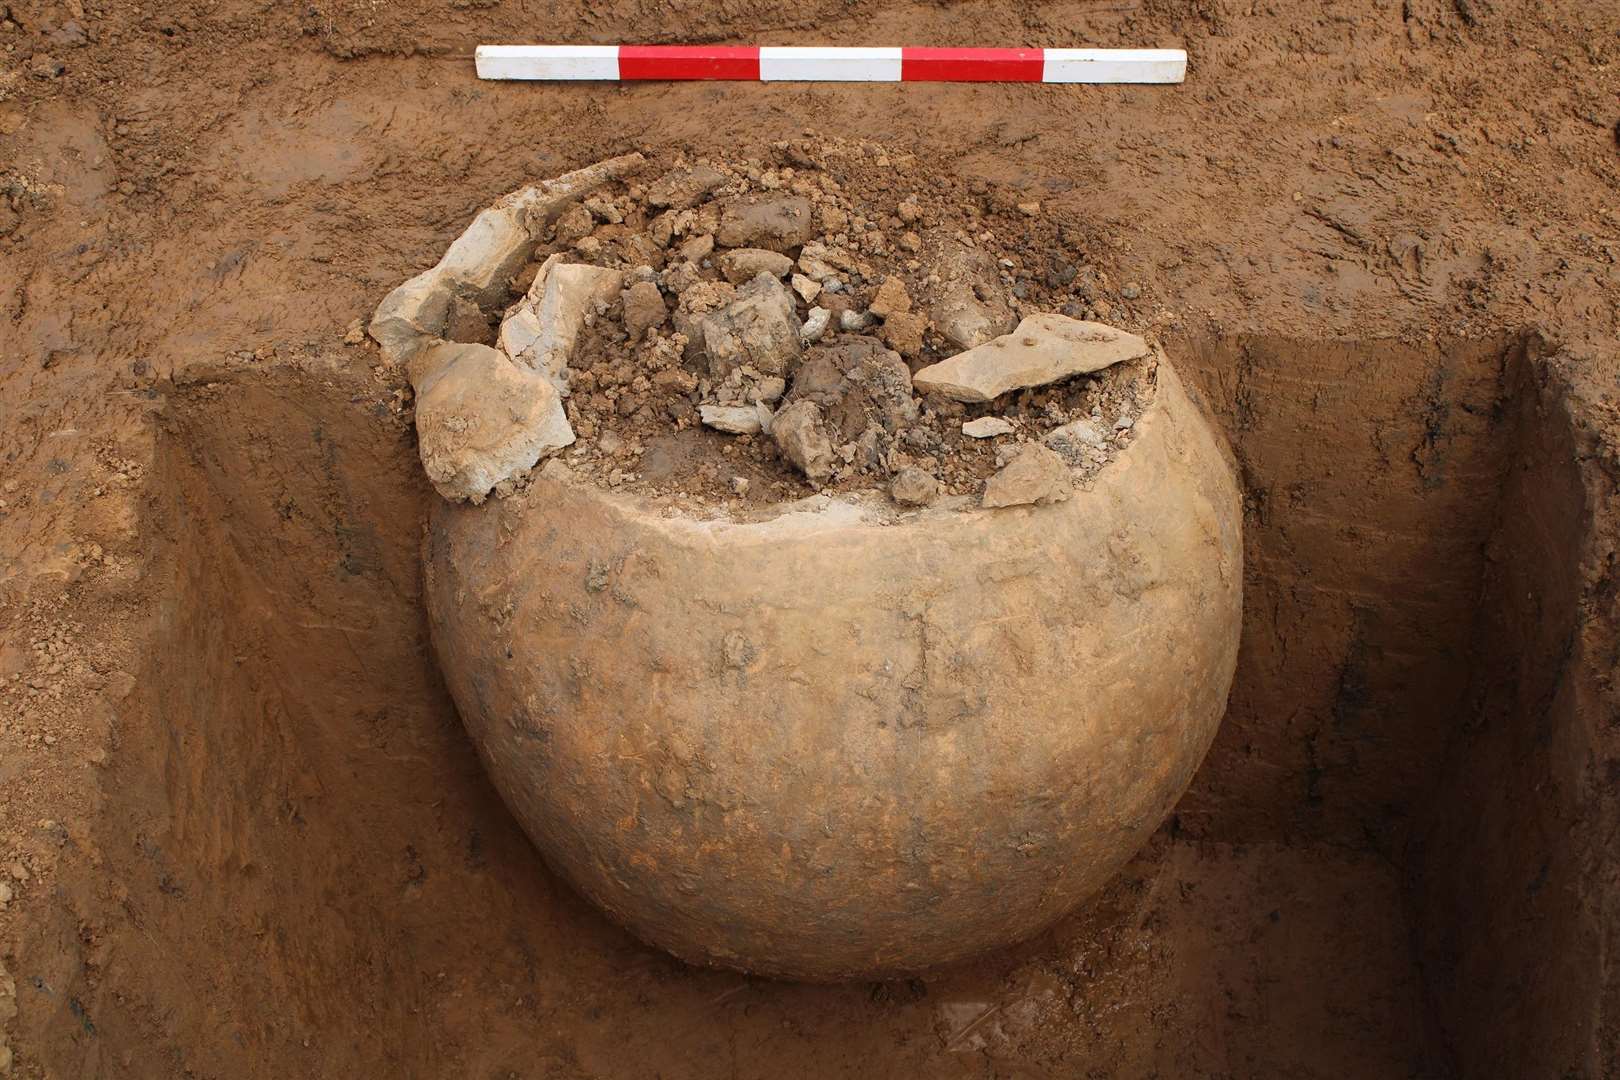 One of the Roman finds at the site